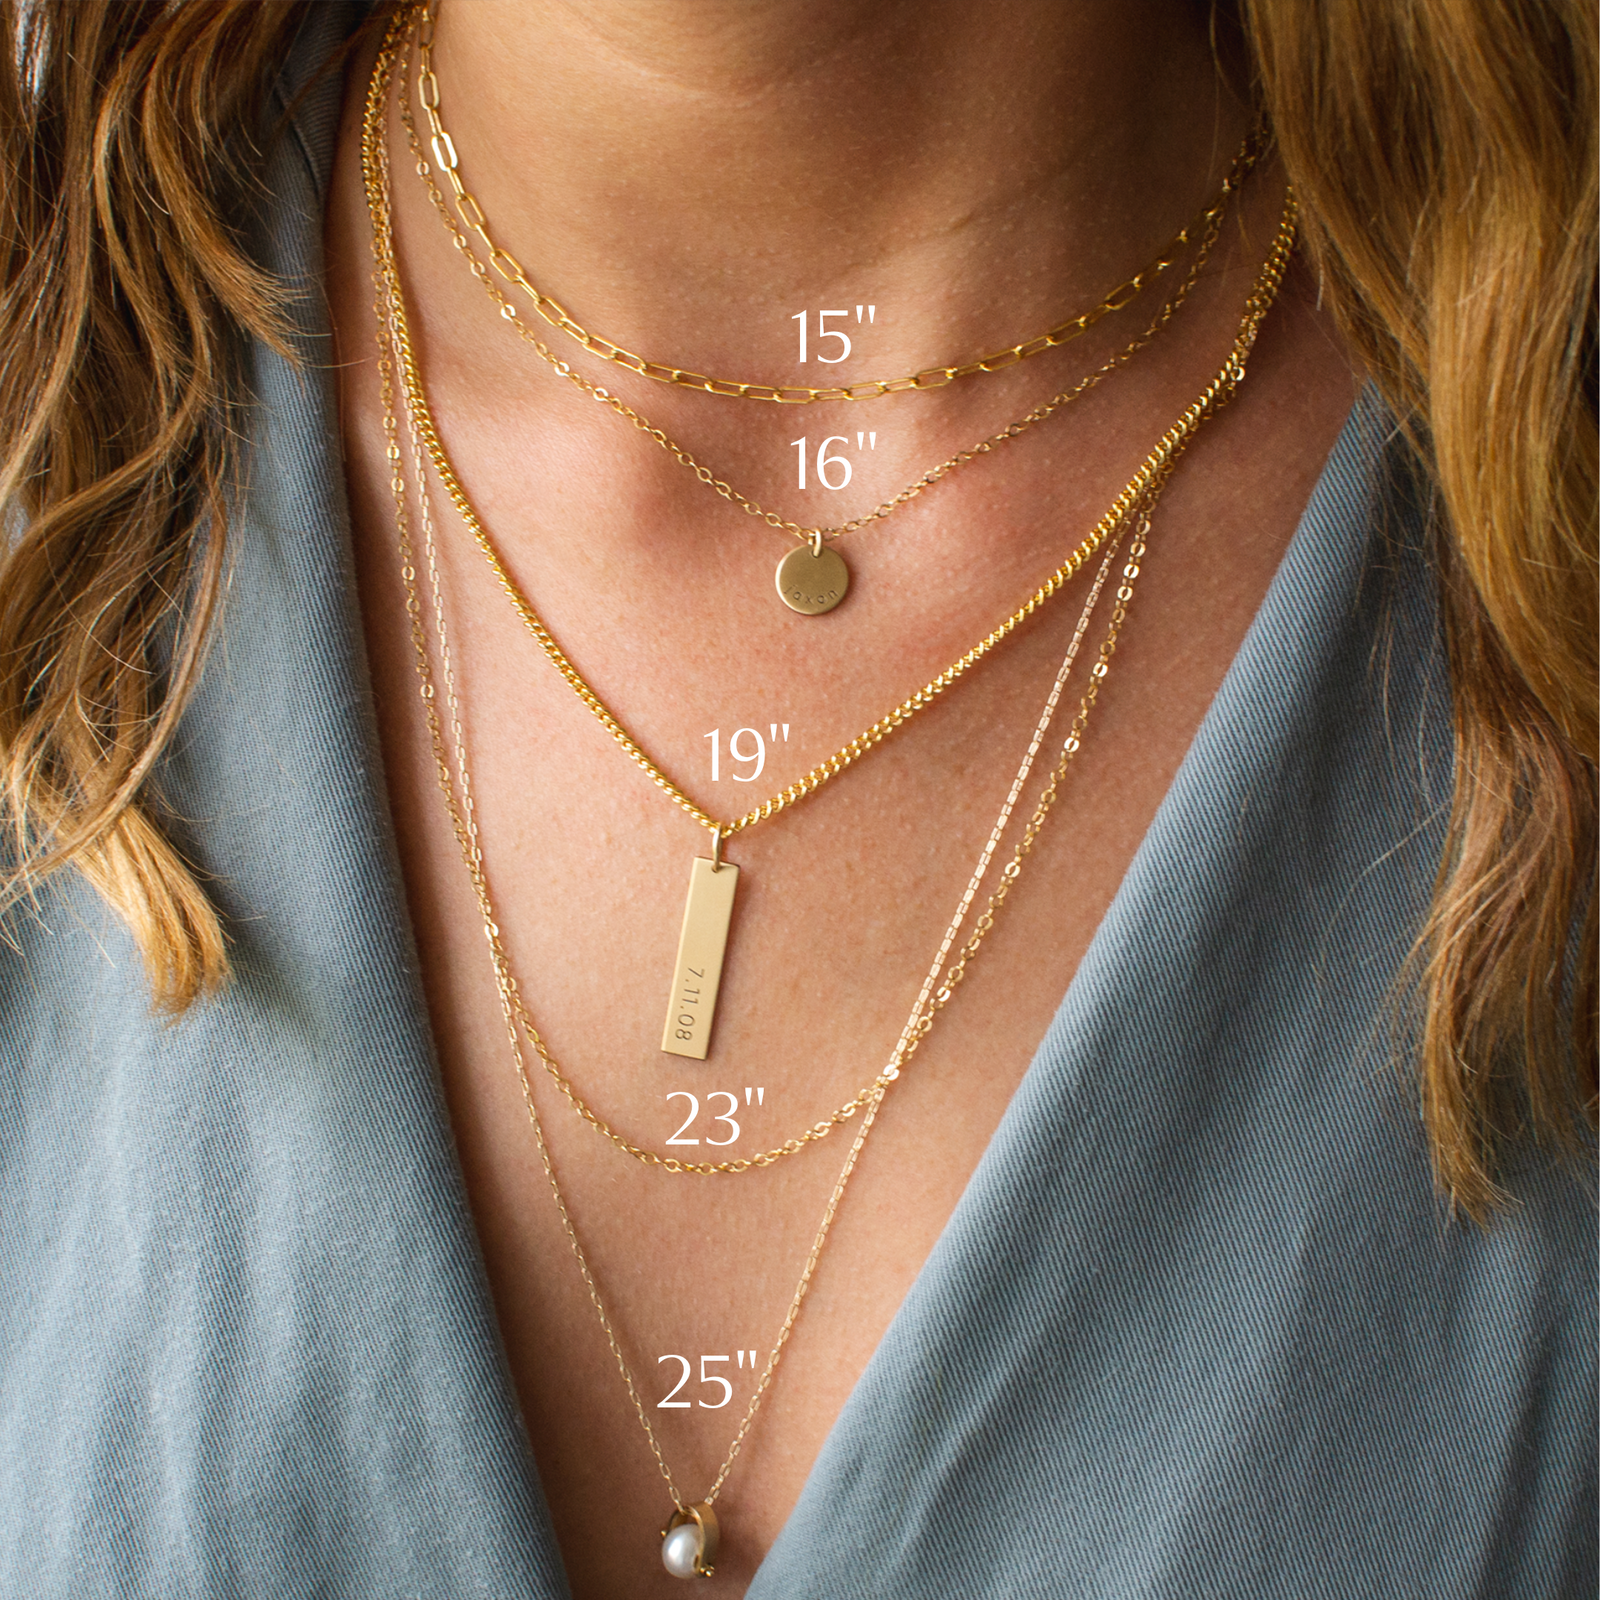 5 tips for choosing the perfect necklace length | Samantha Slater Studio